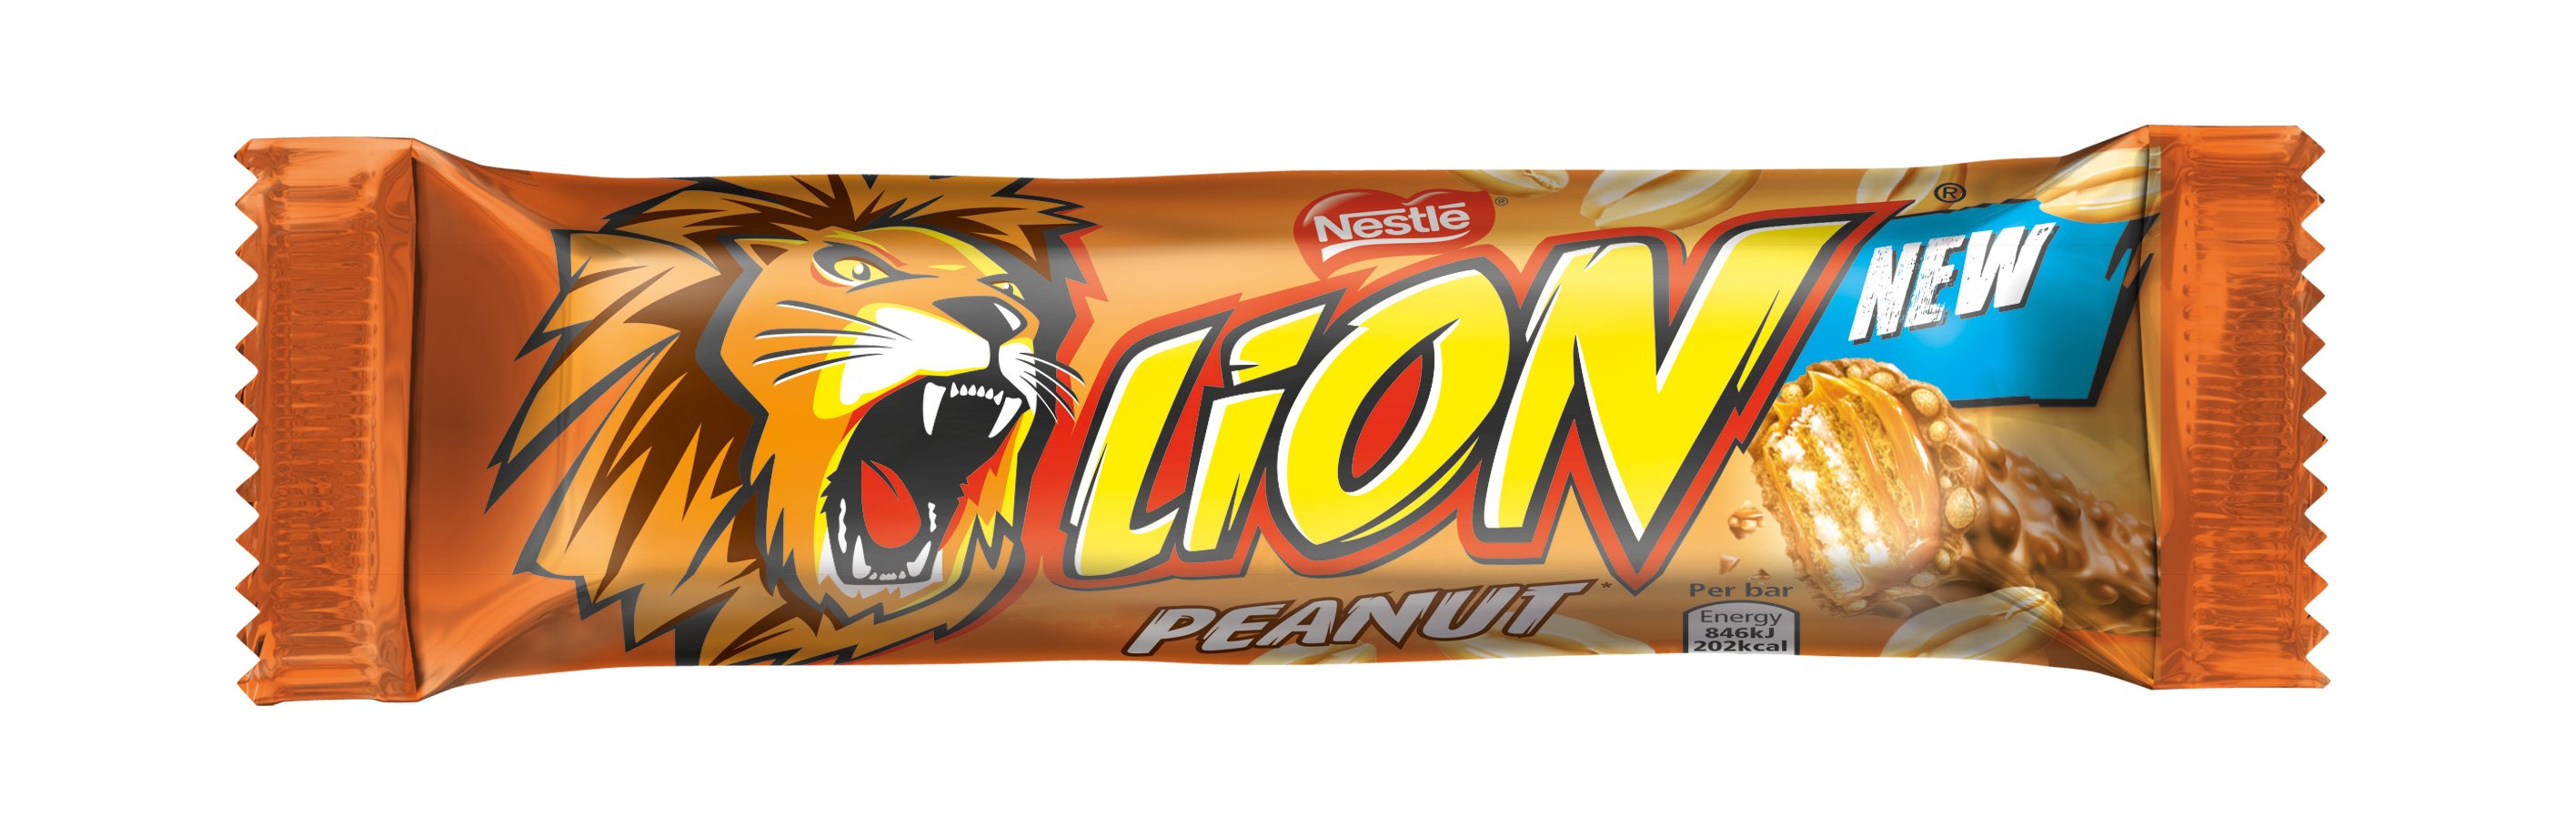 Peanut Lion bar to launch exclusively for wholesale and